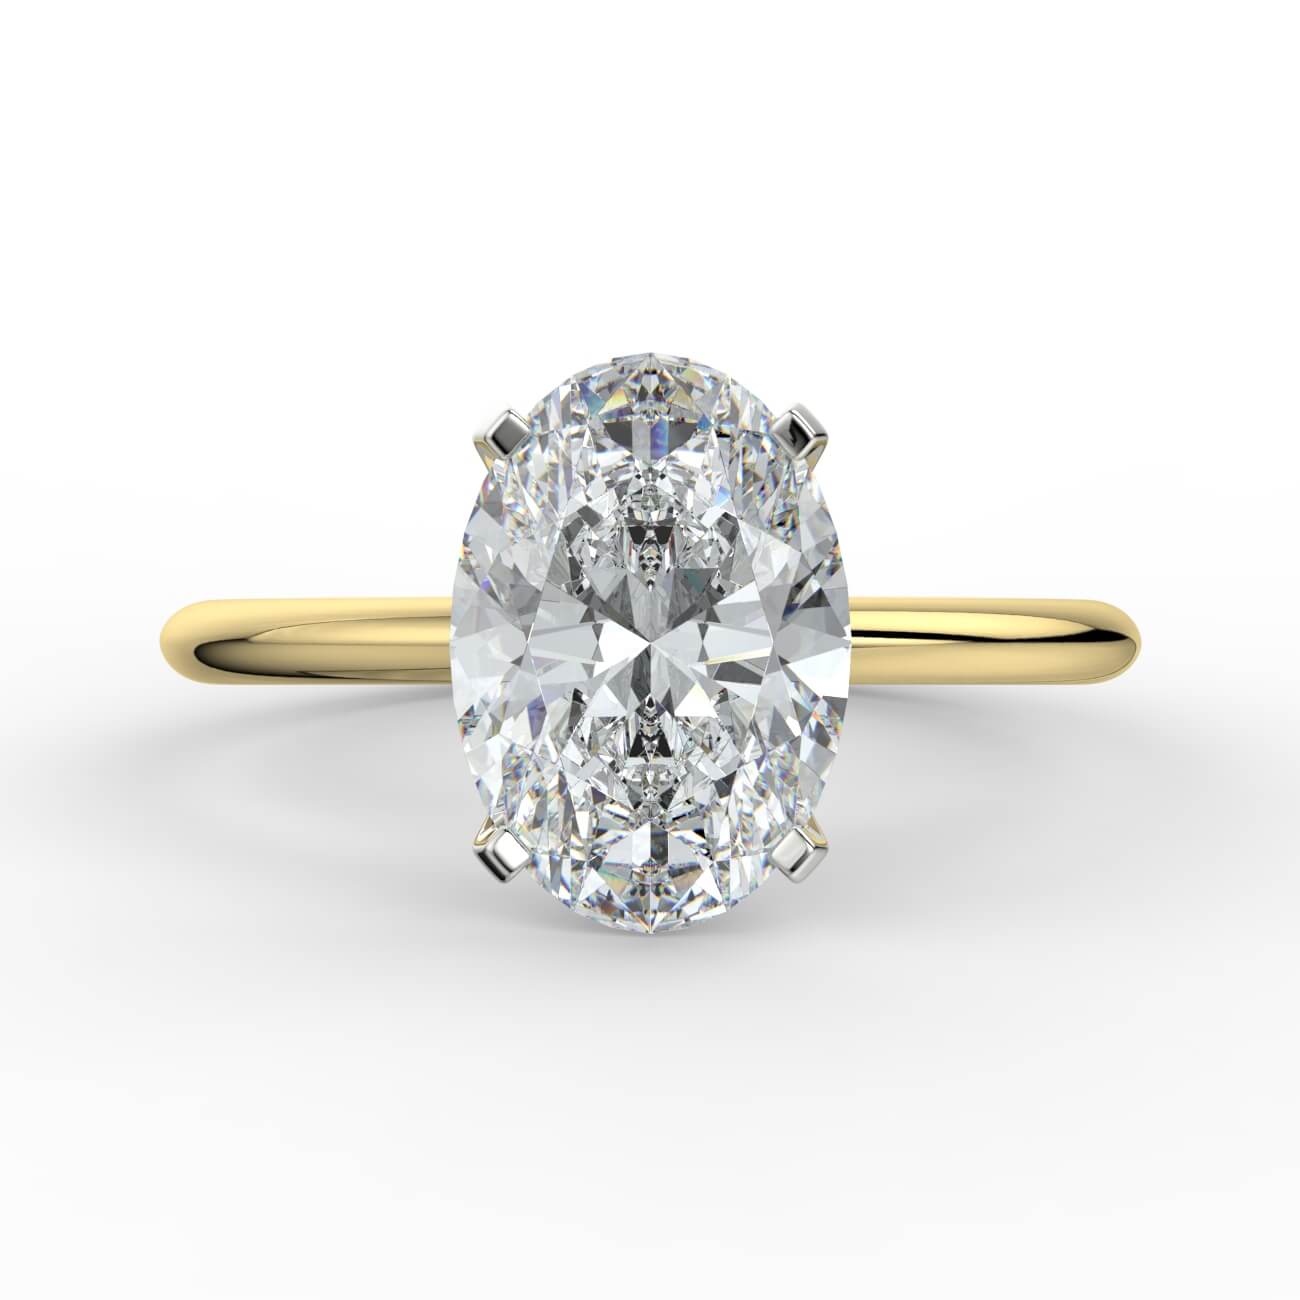 Tapering Solitaire Engagement Ring in white and yellow gold – Australian Diamond Network